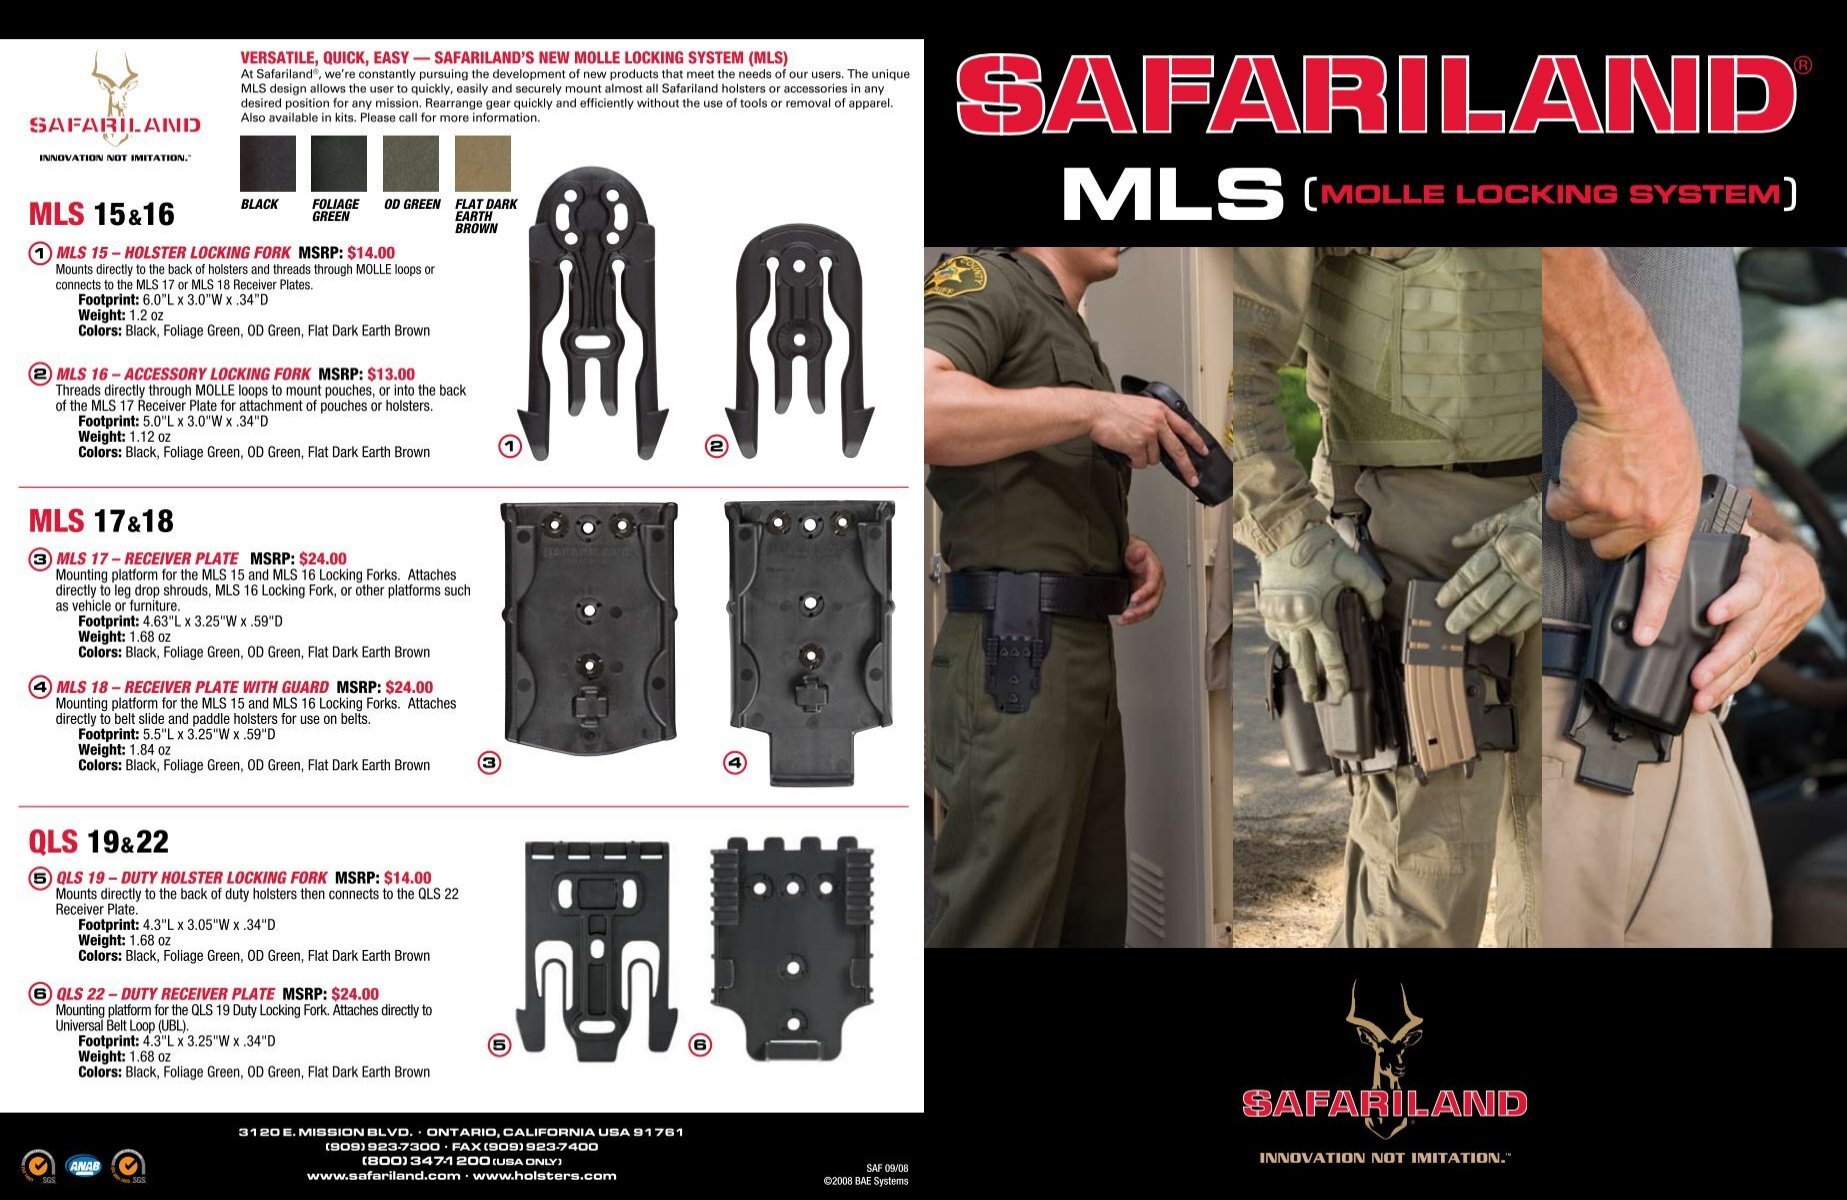 What is the difference between Safariland's QLS, ELS, and MLS